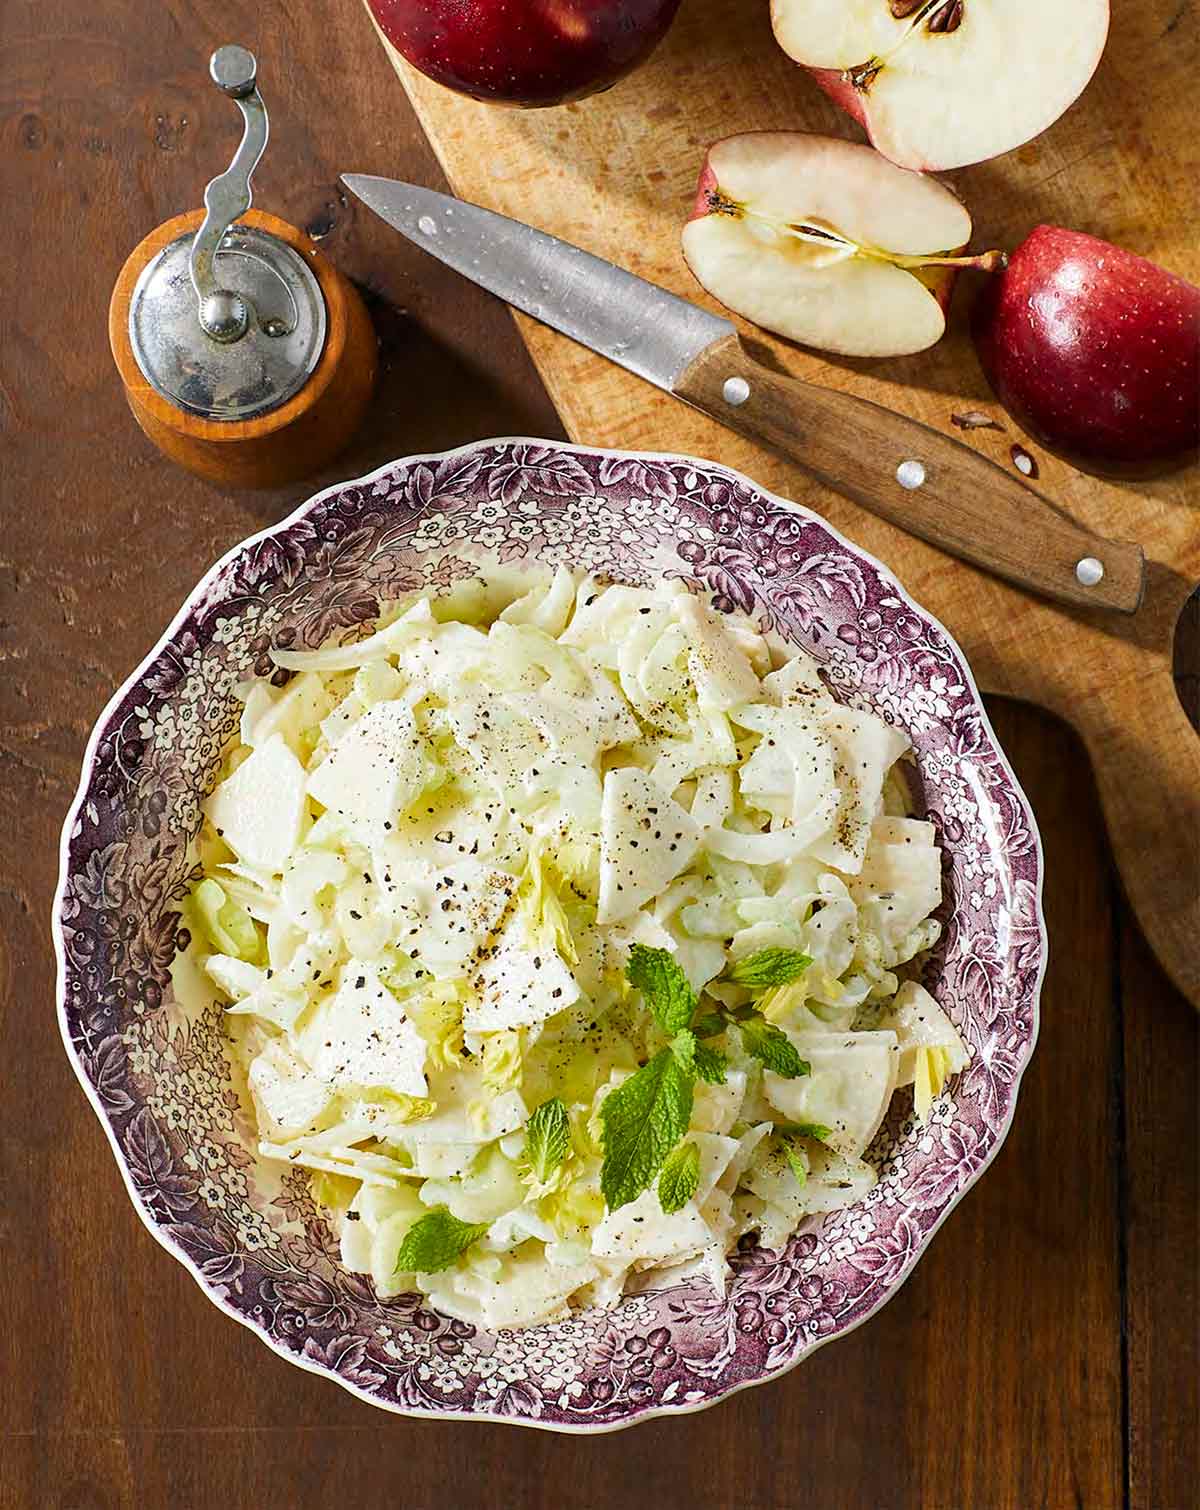 Apple and celery salad in a patterned bowl, beside a cutting board with a knife and apple slices.